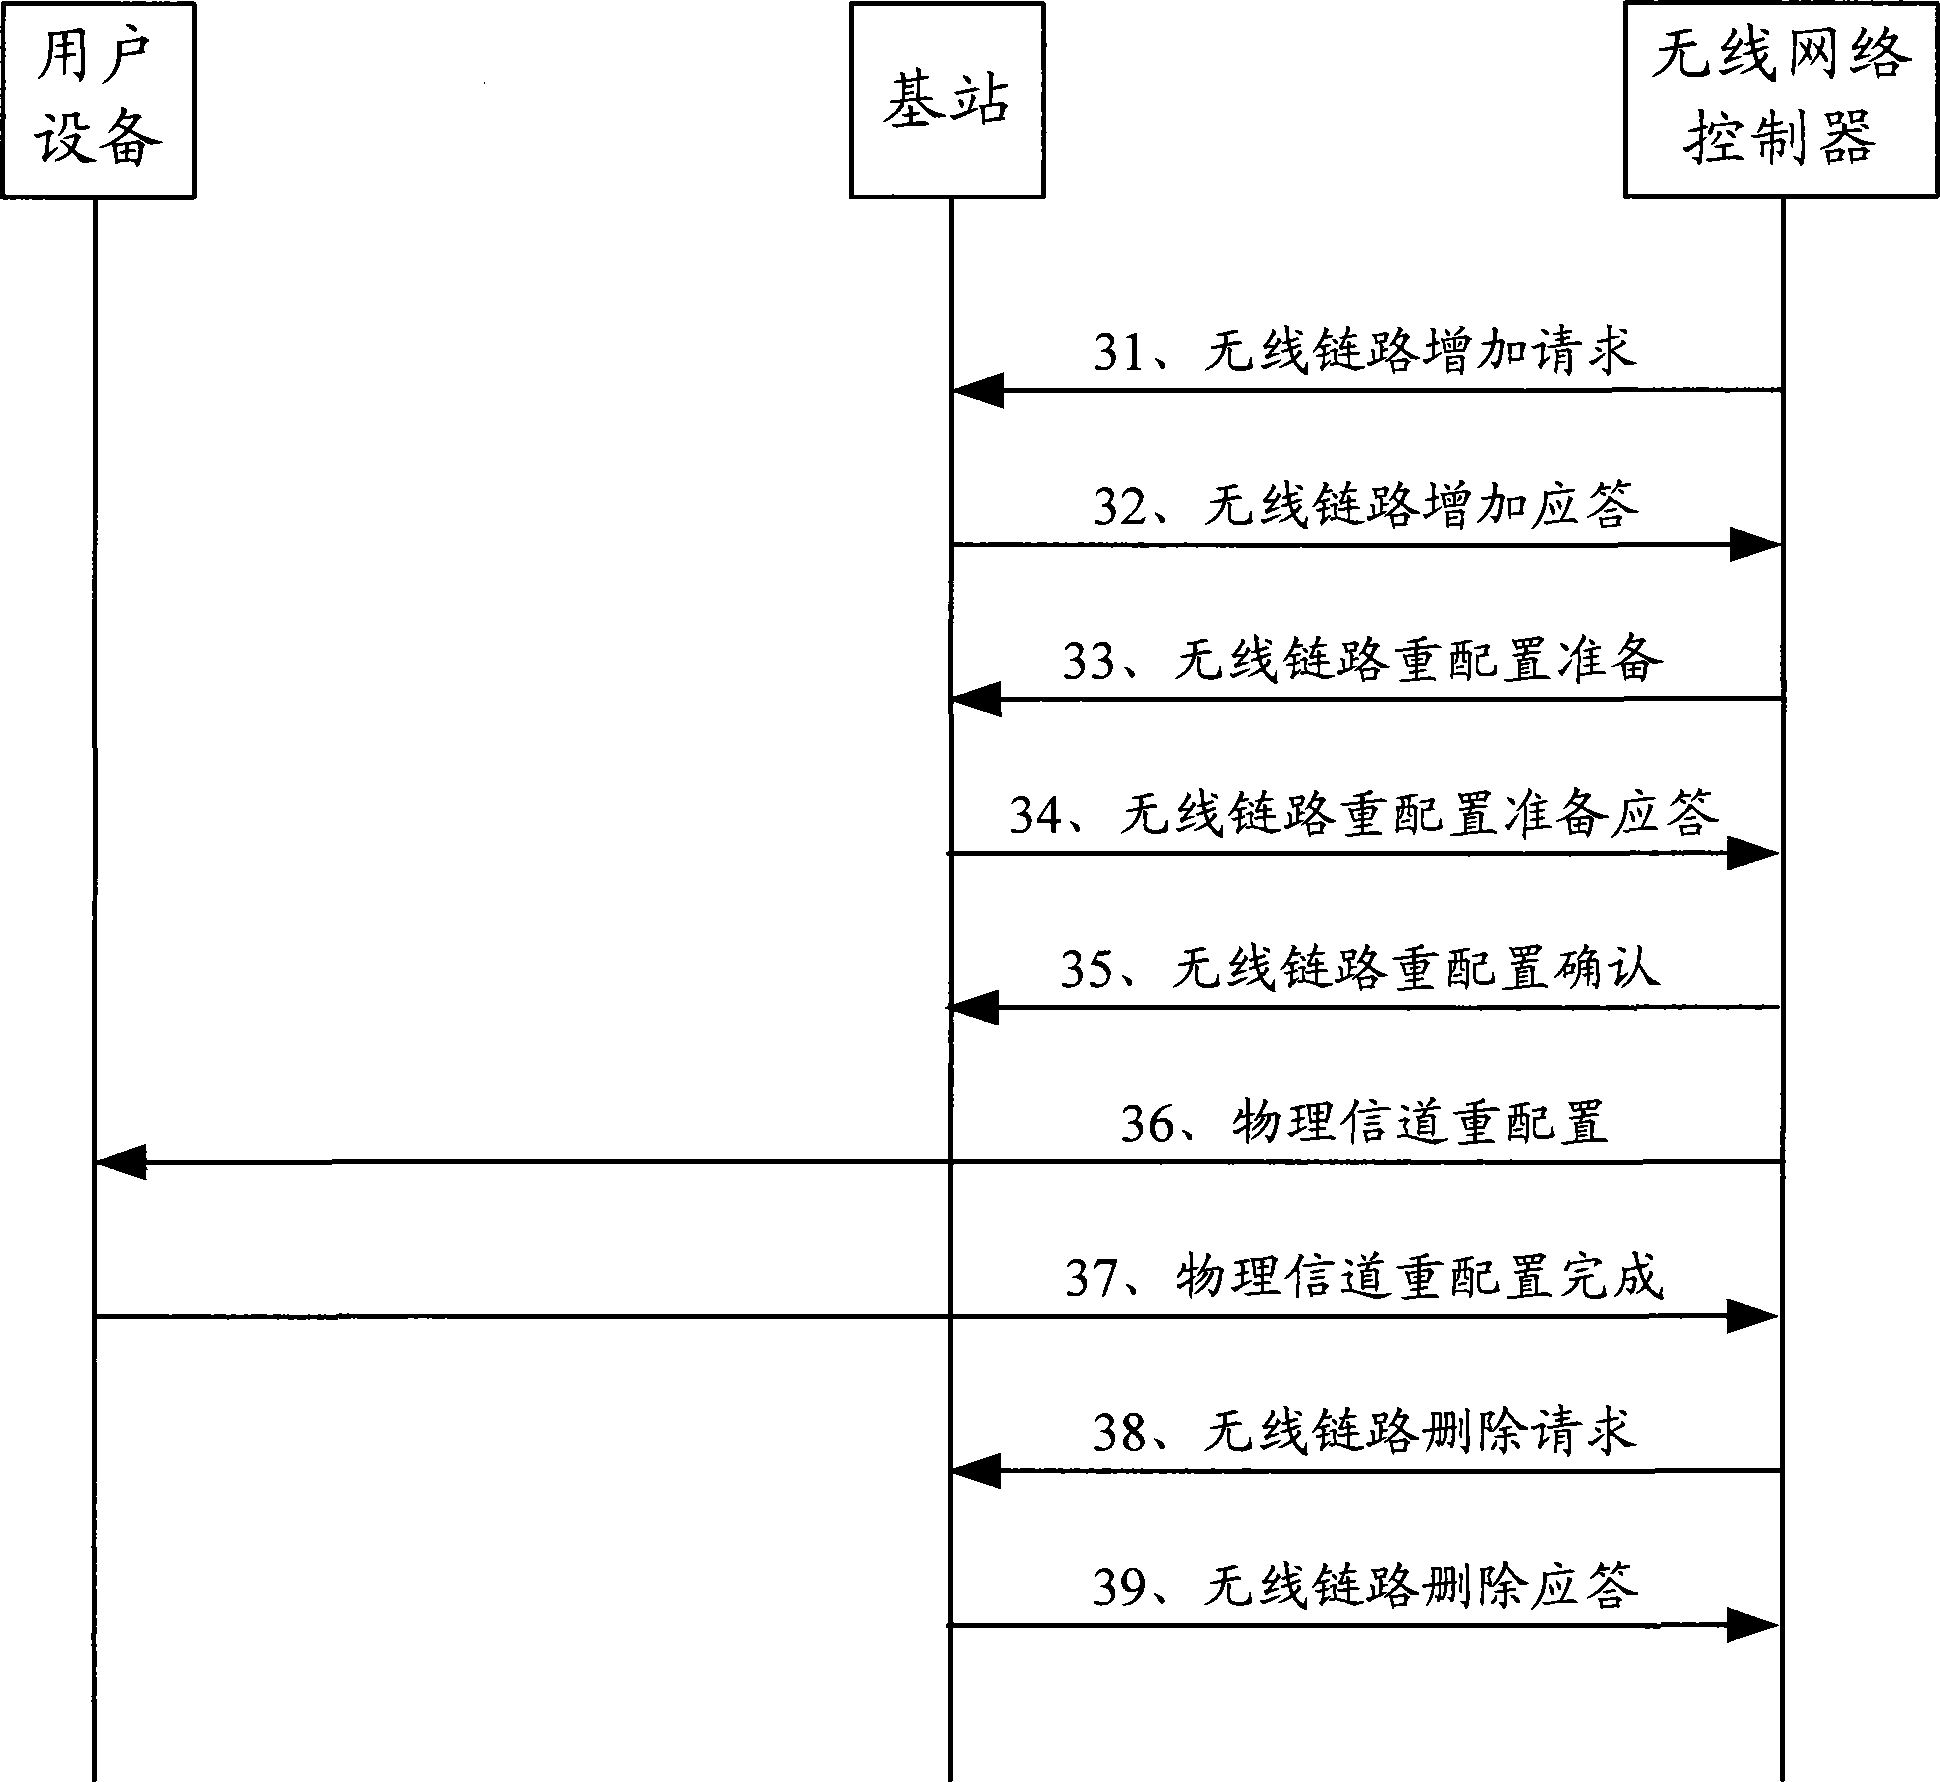 Method and apparatus for switching district in a base station, method and apparatus for switching channel in a district